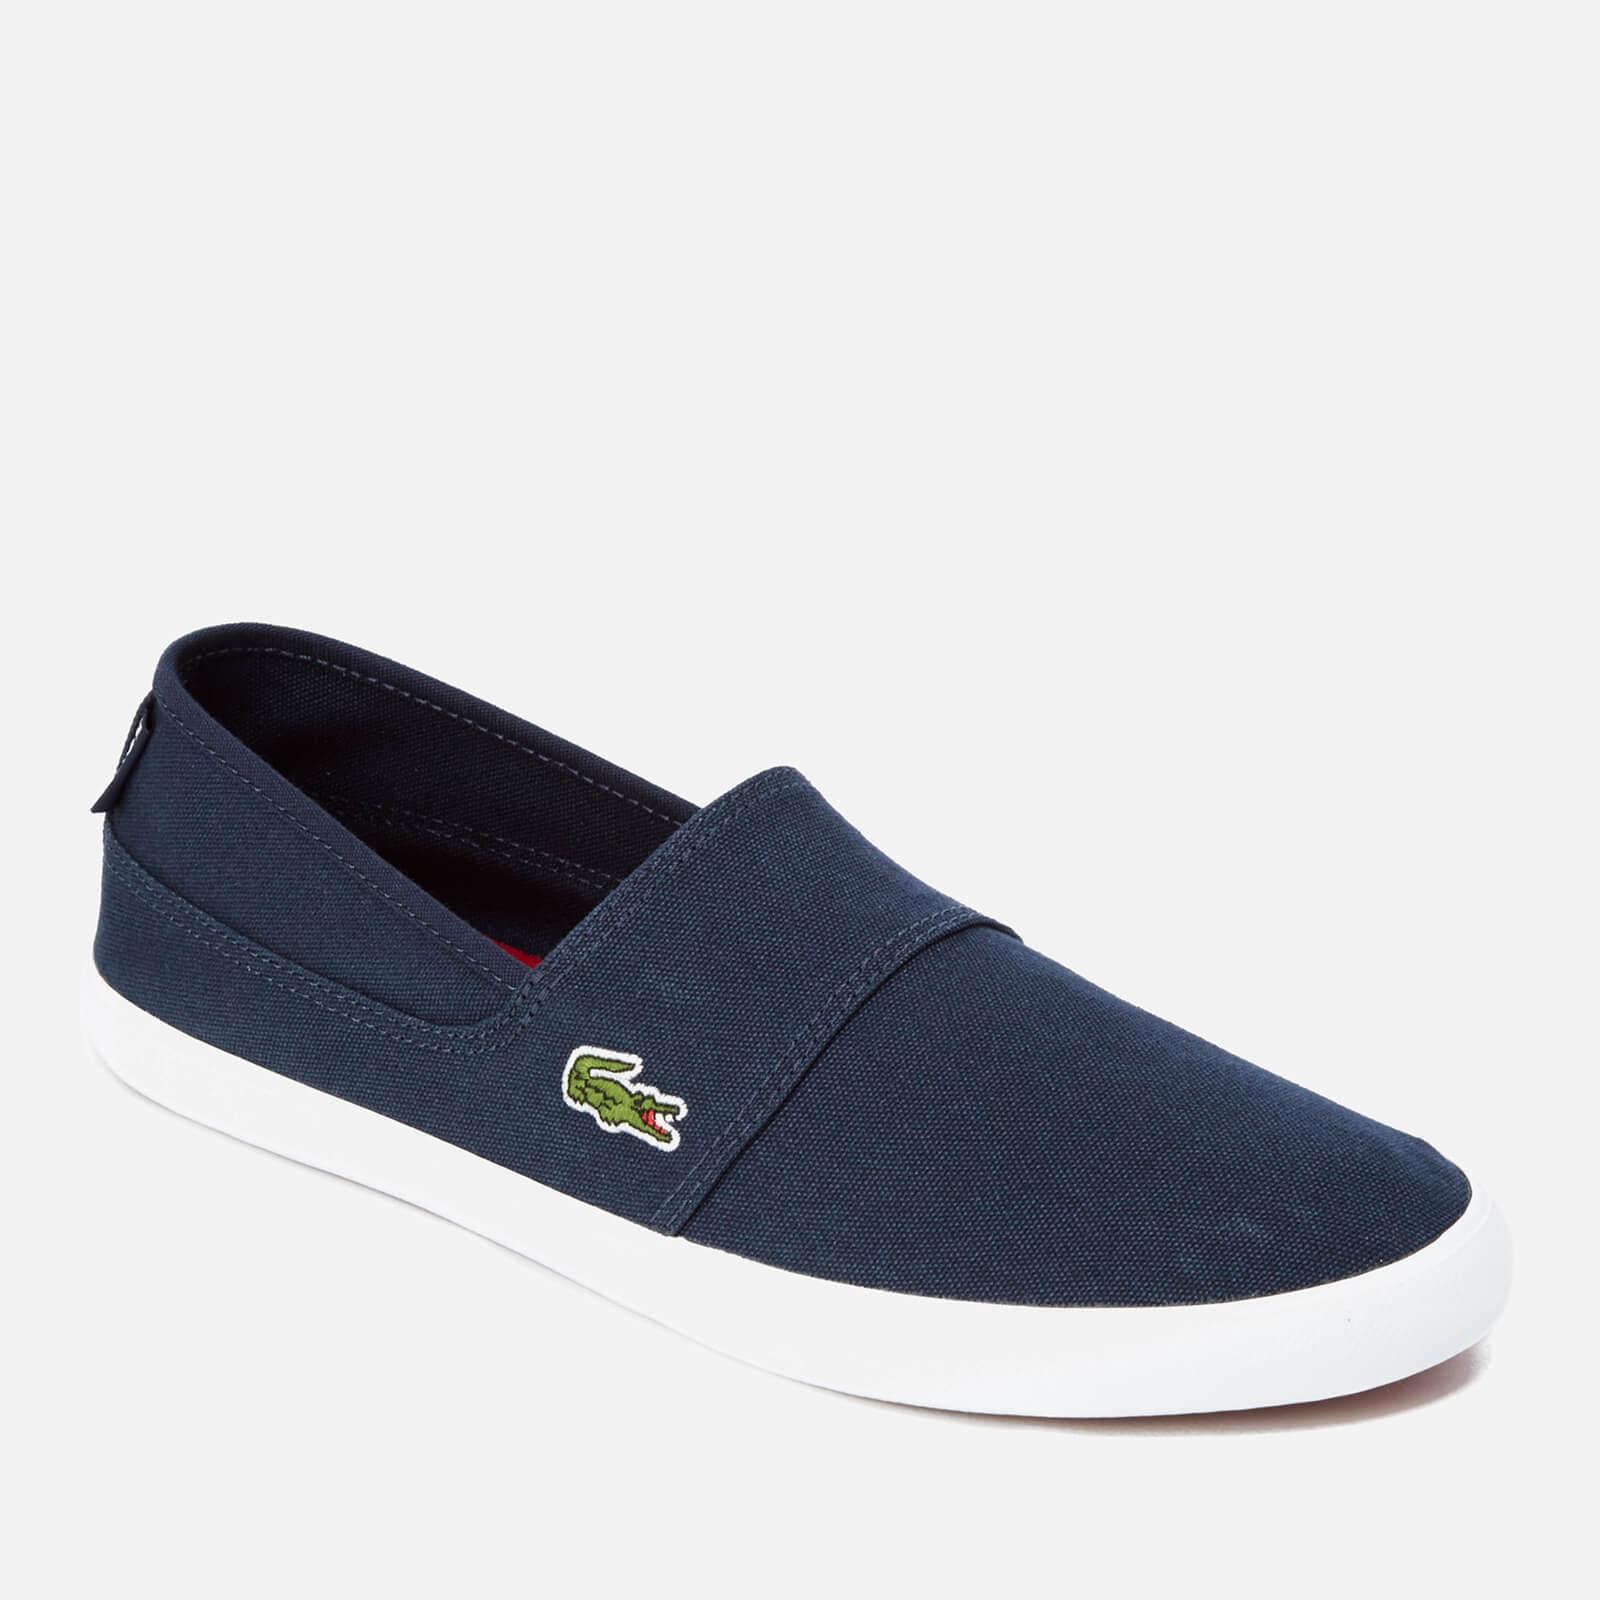 Lacoste Marice BL 2 Blue White Canvas Mens Slip-ons Shoes 